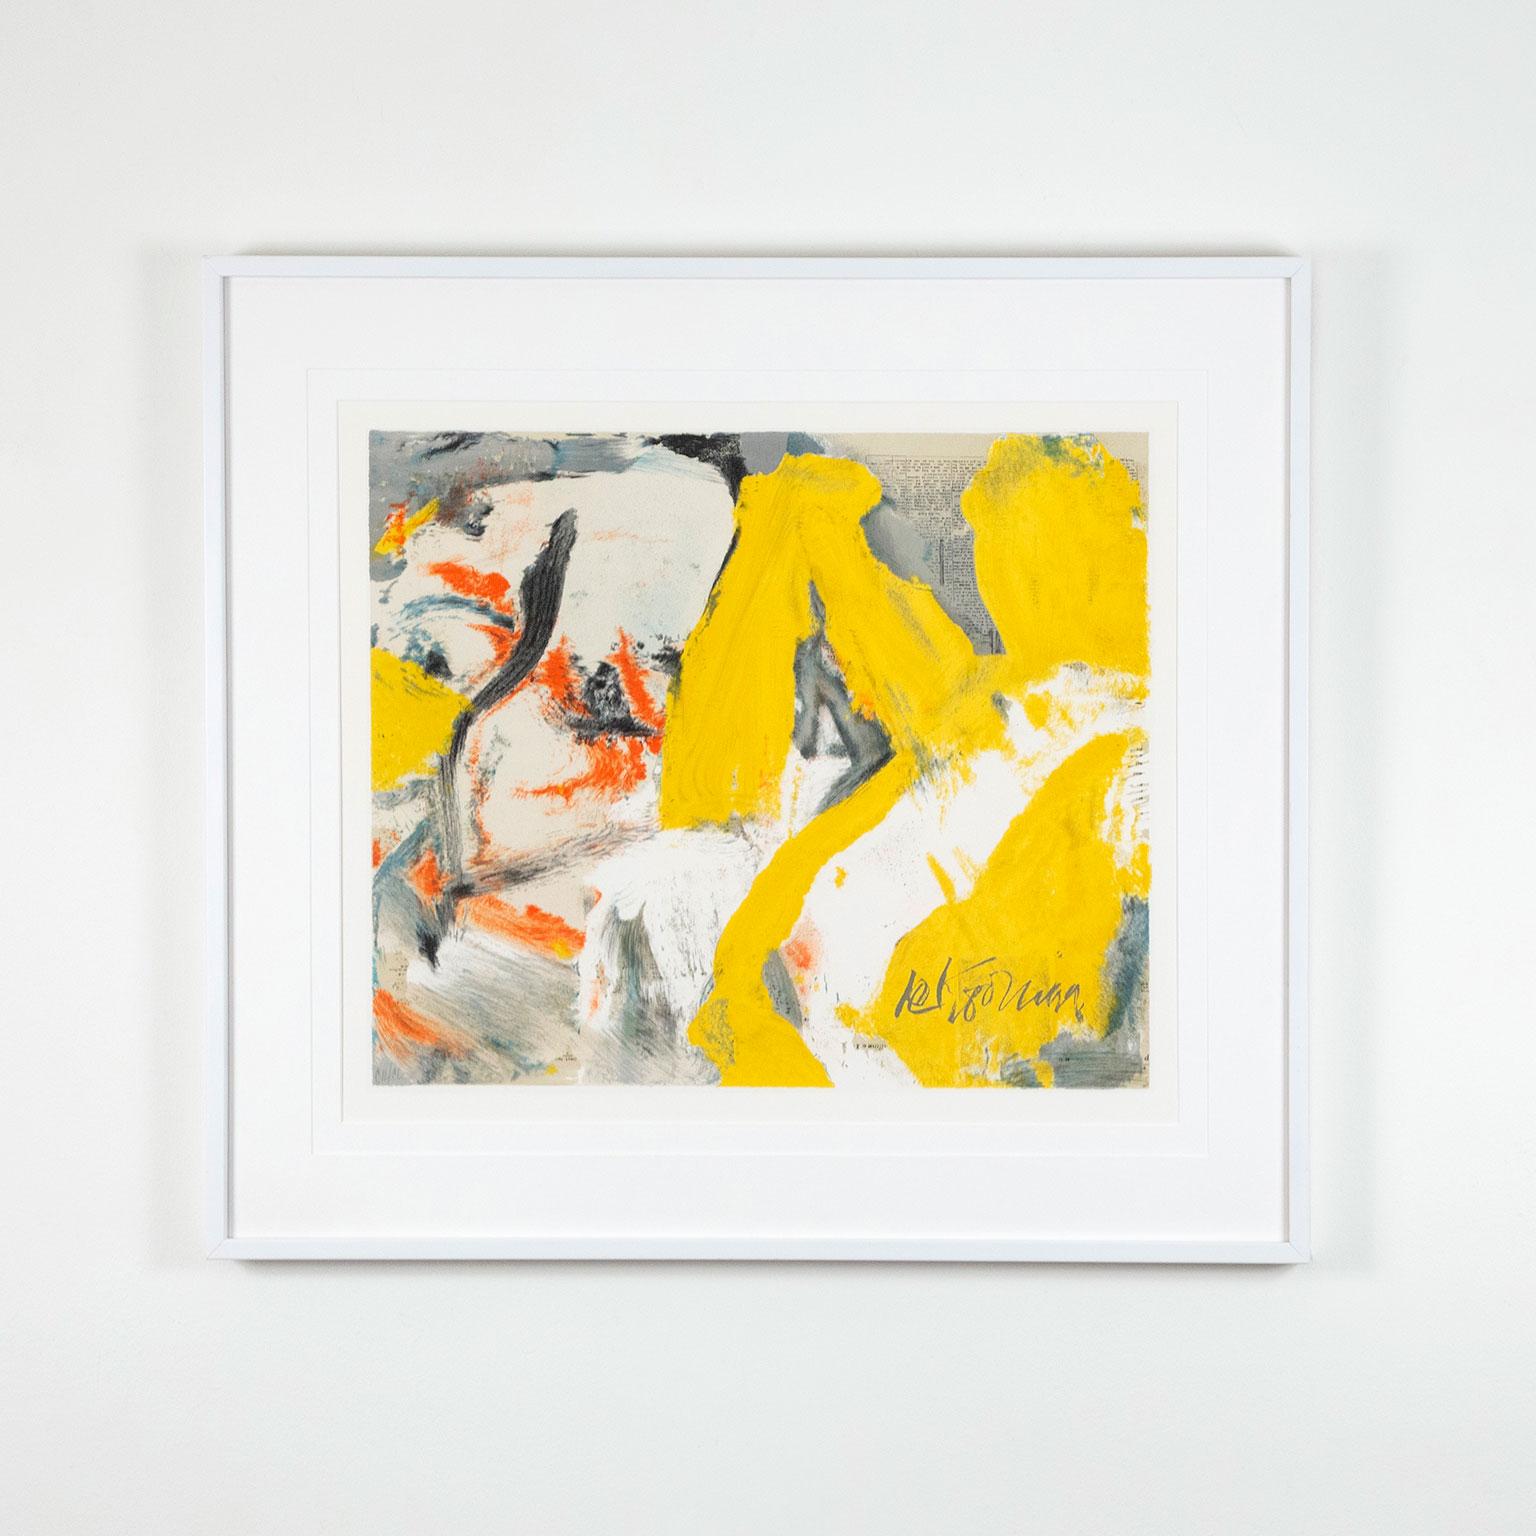 The Man and the Big Blonde - Print by Willem de Kooning